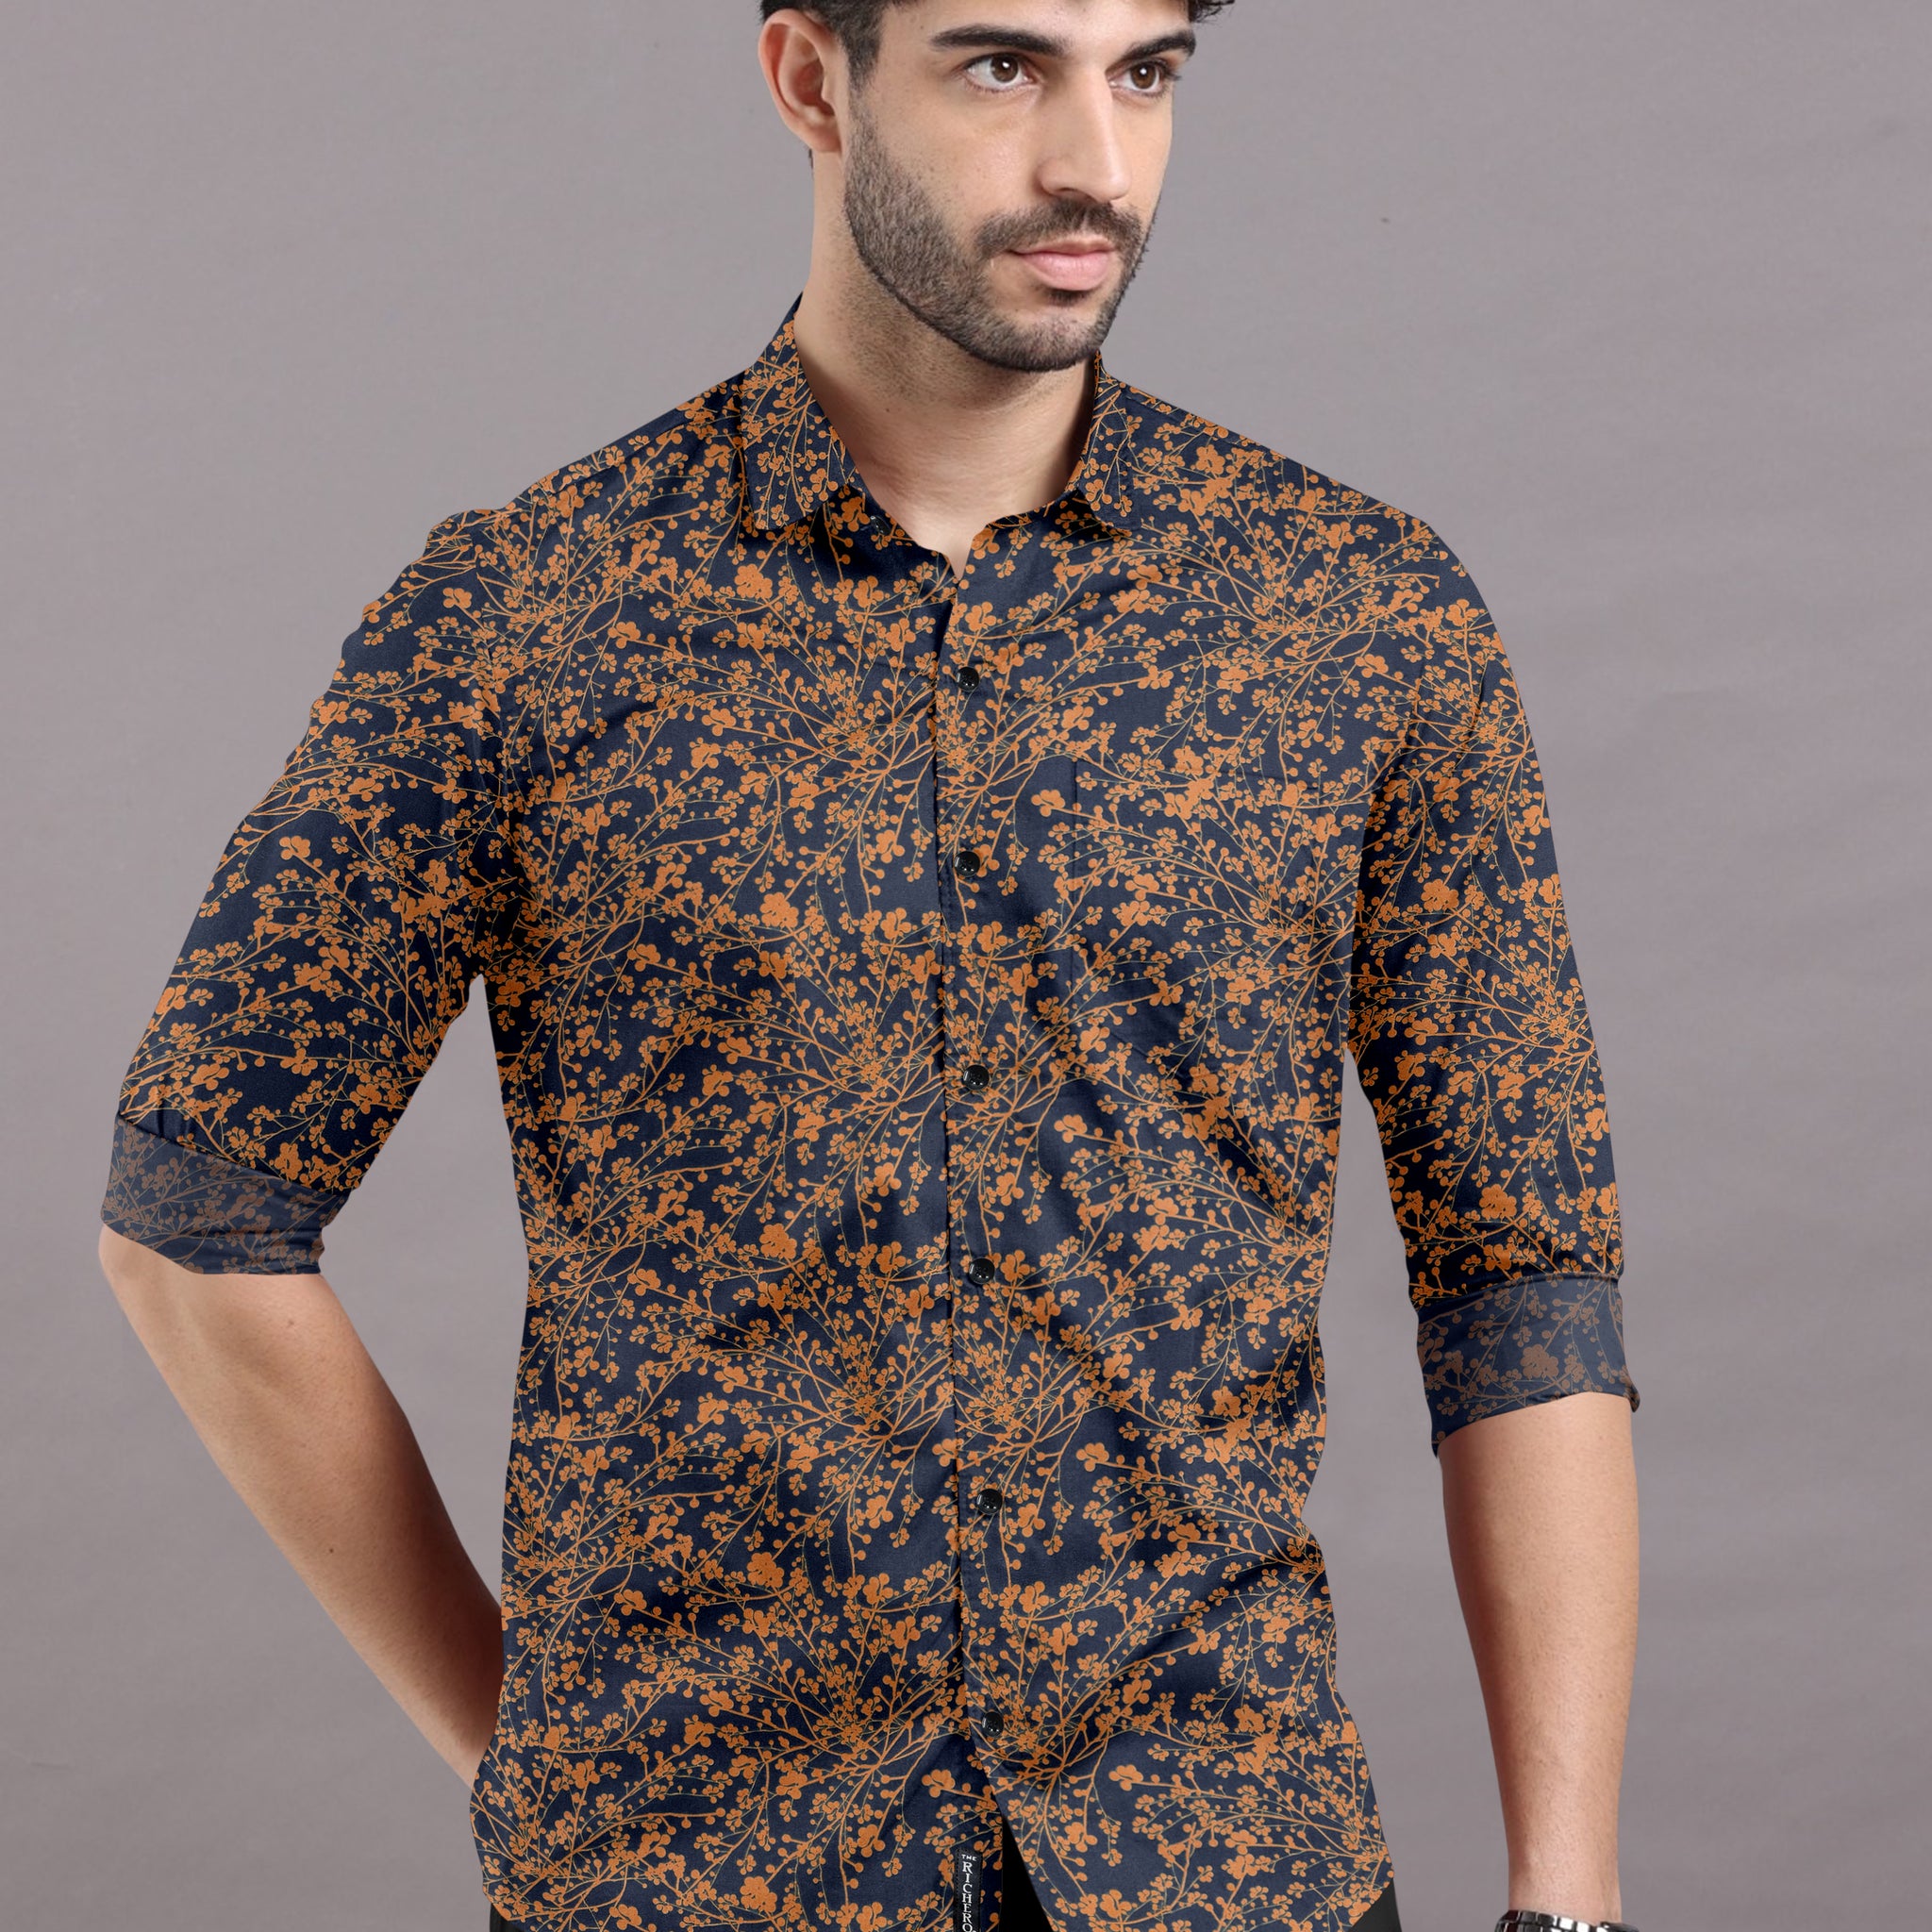 Prussian Blue Shirt with Brown Floral Print